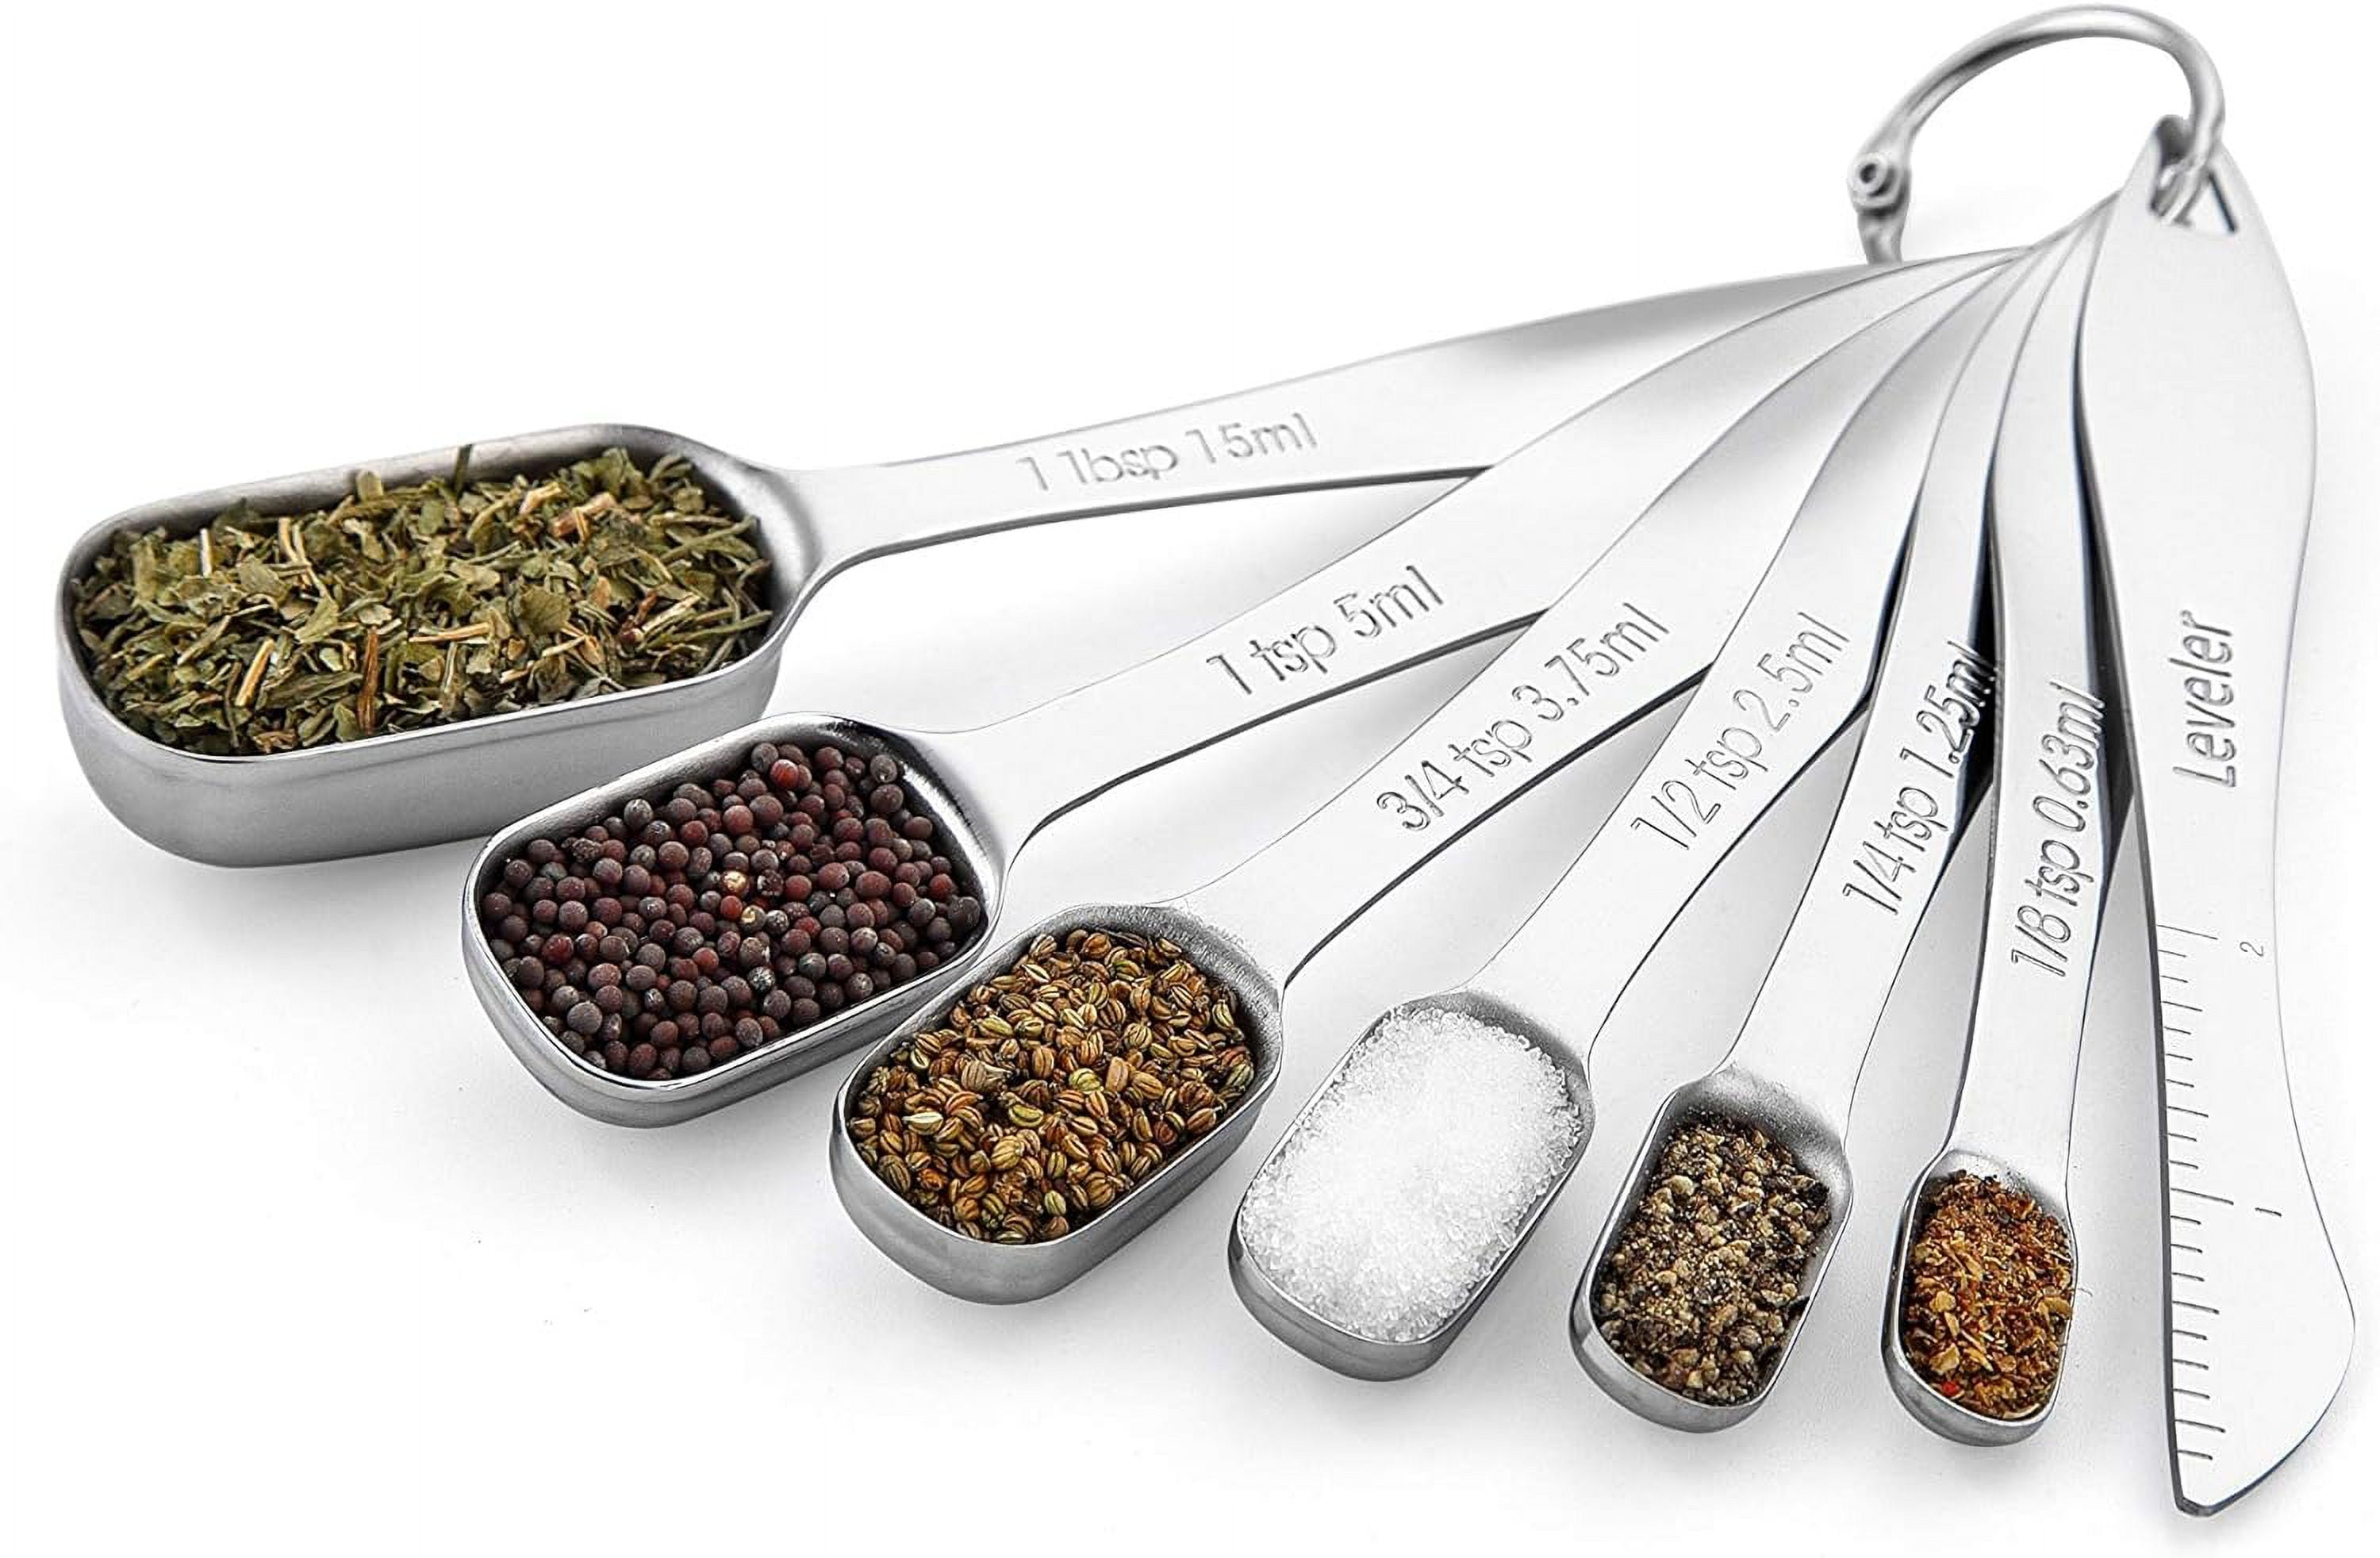 Zulay Heavy Duty Stainless Steel Measuring Spoons with Easy to Read, Slim  Design for Narrow Spice Jars, 6 Piece Measuring Spoons with Etched Markings